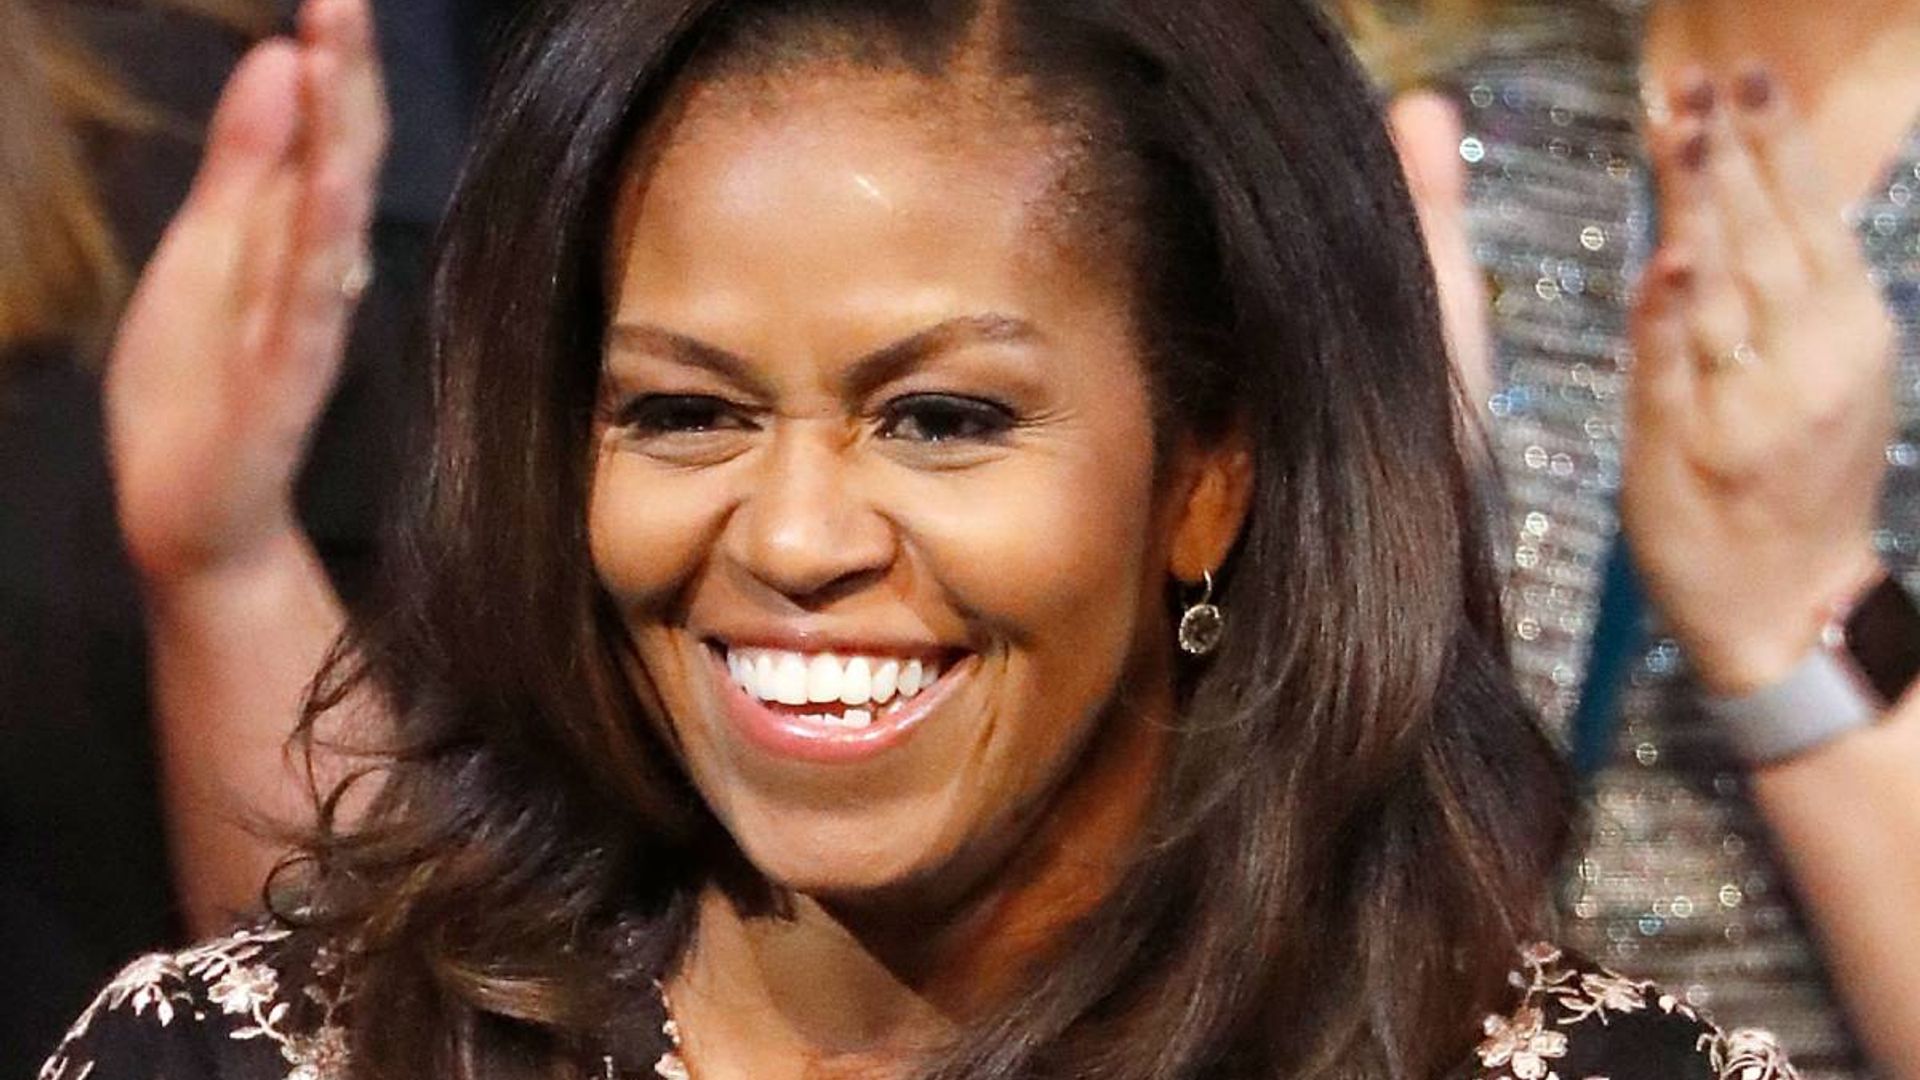 michelle obama wows mini dress inside family home